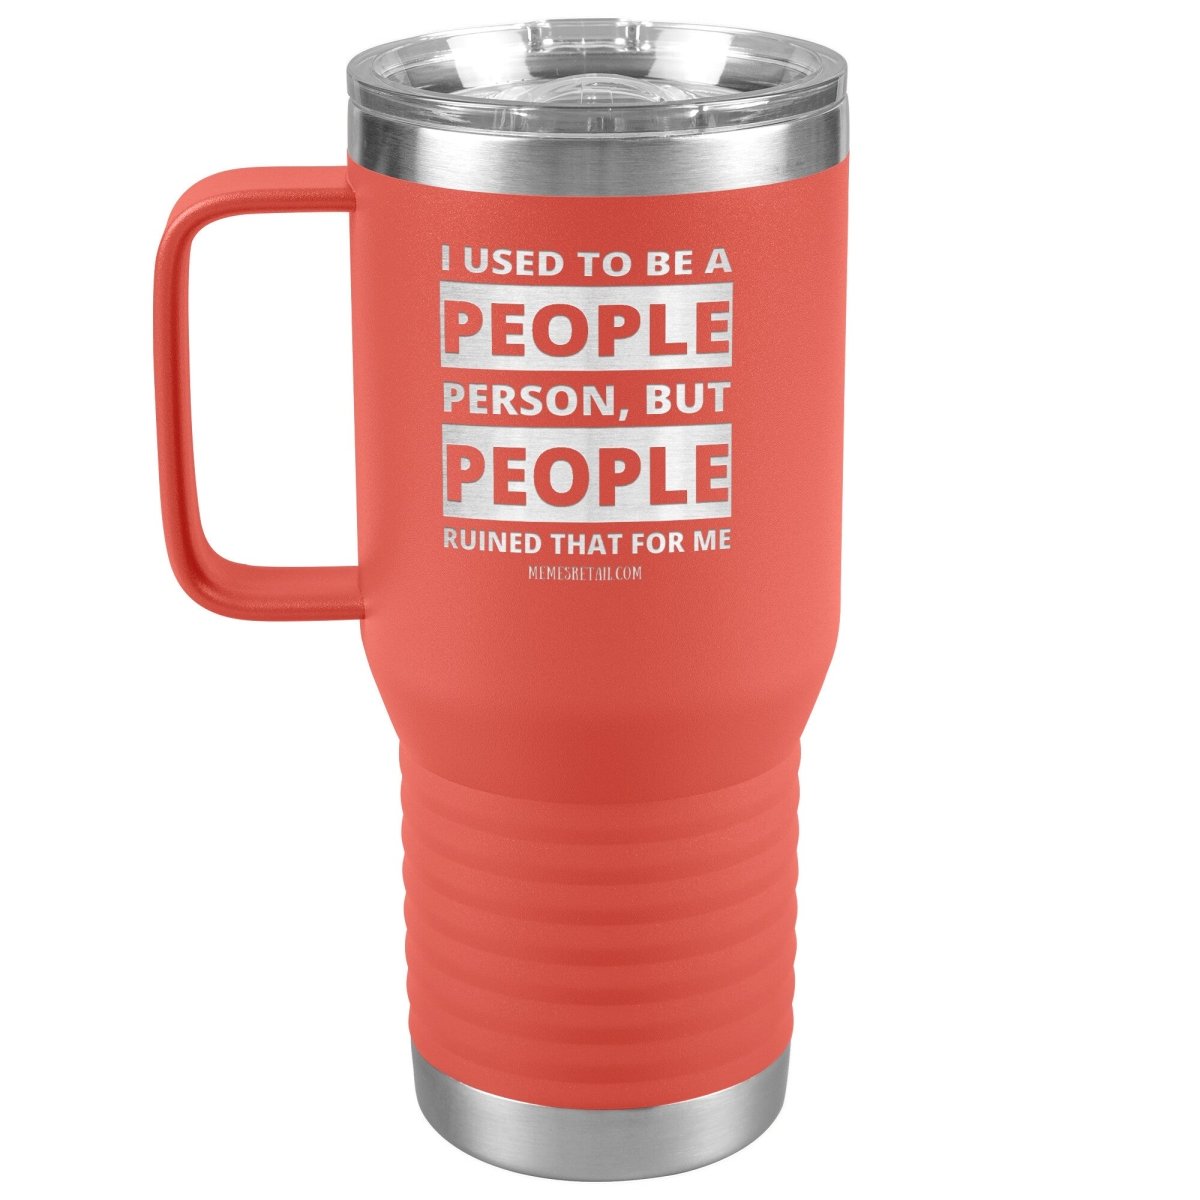 I Used To Be A People Person, But People Ruined That For Me Tumblers, 20oz Travel Tumbler / Coral - MemesRetail.com